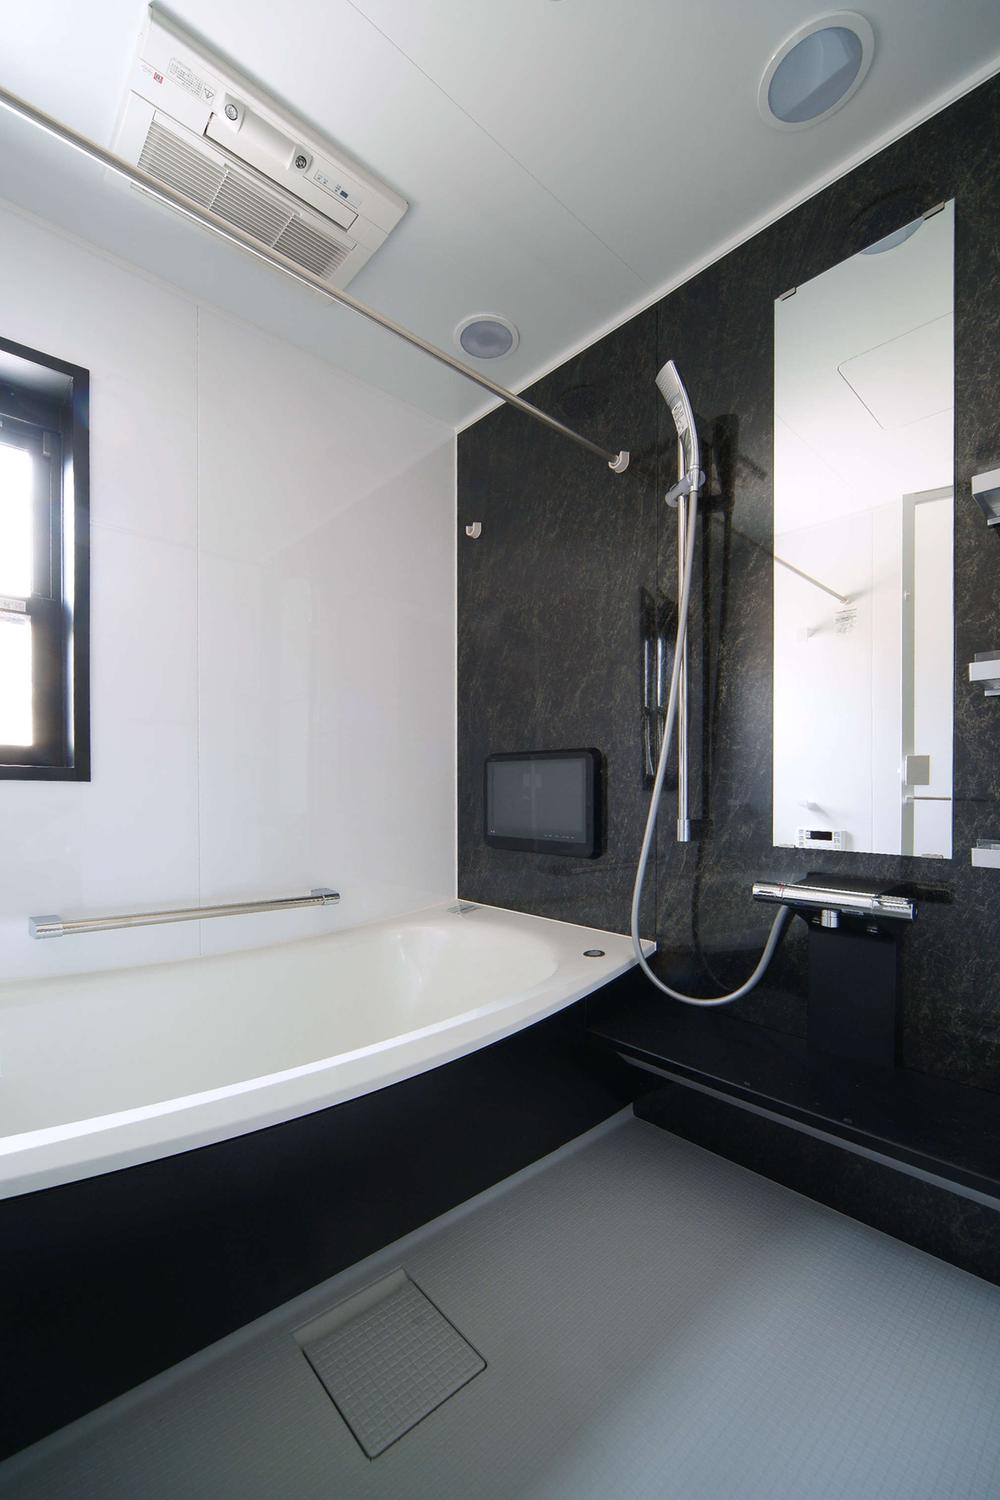 Same specifications photo (bathroom). Spacious relaxing bathroom in the family, even one person. (Our example of construction)